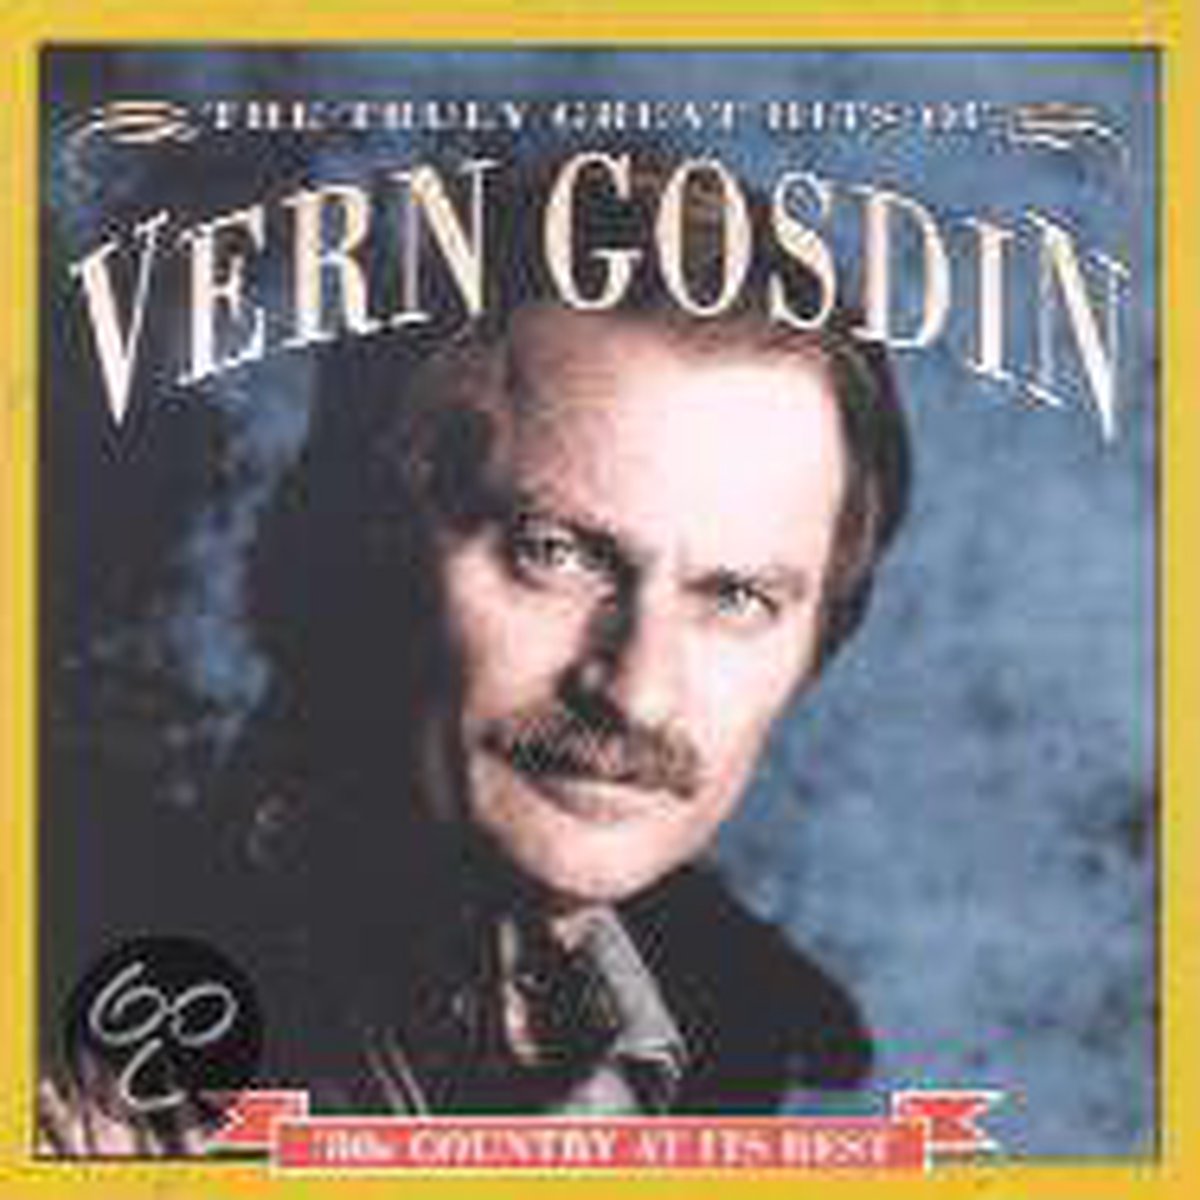 80s Country At Its Best - Vern Gosdin